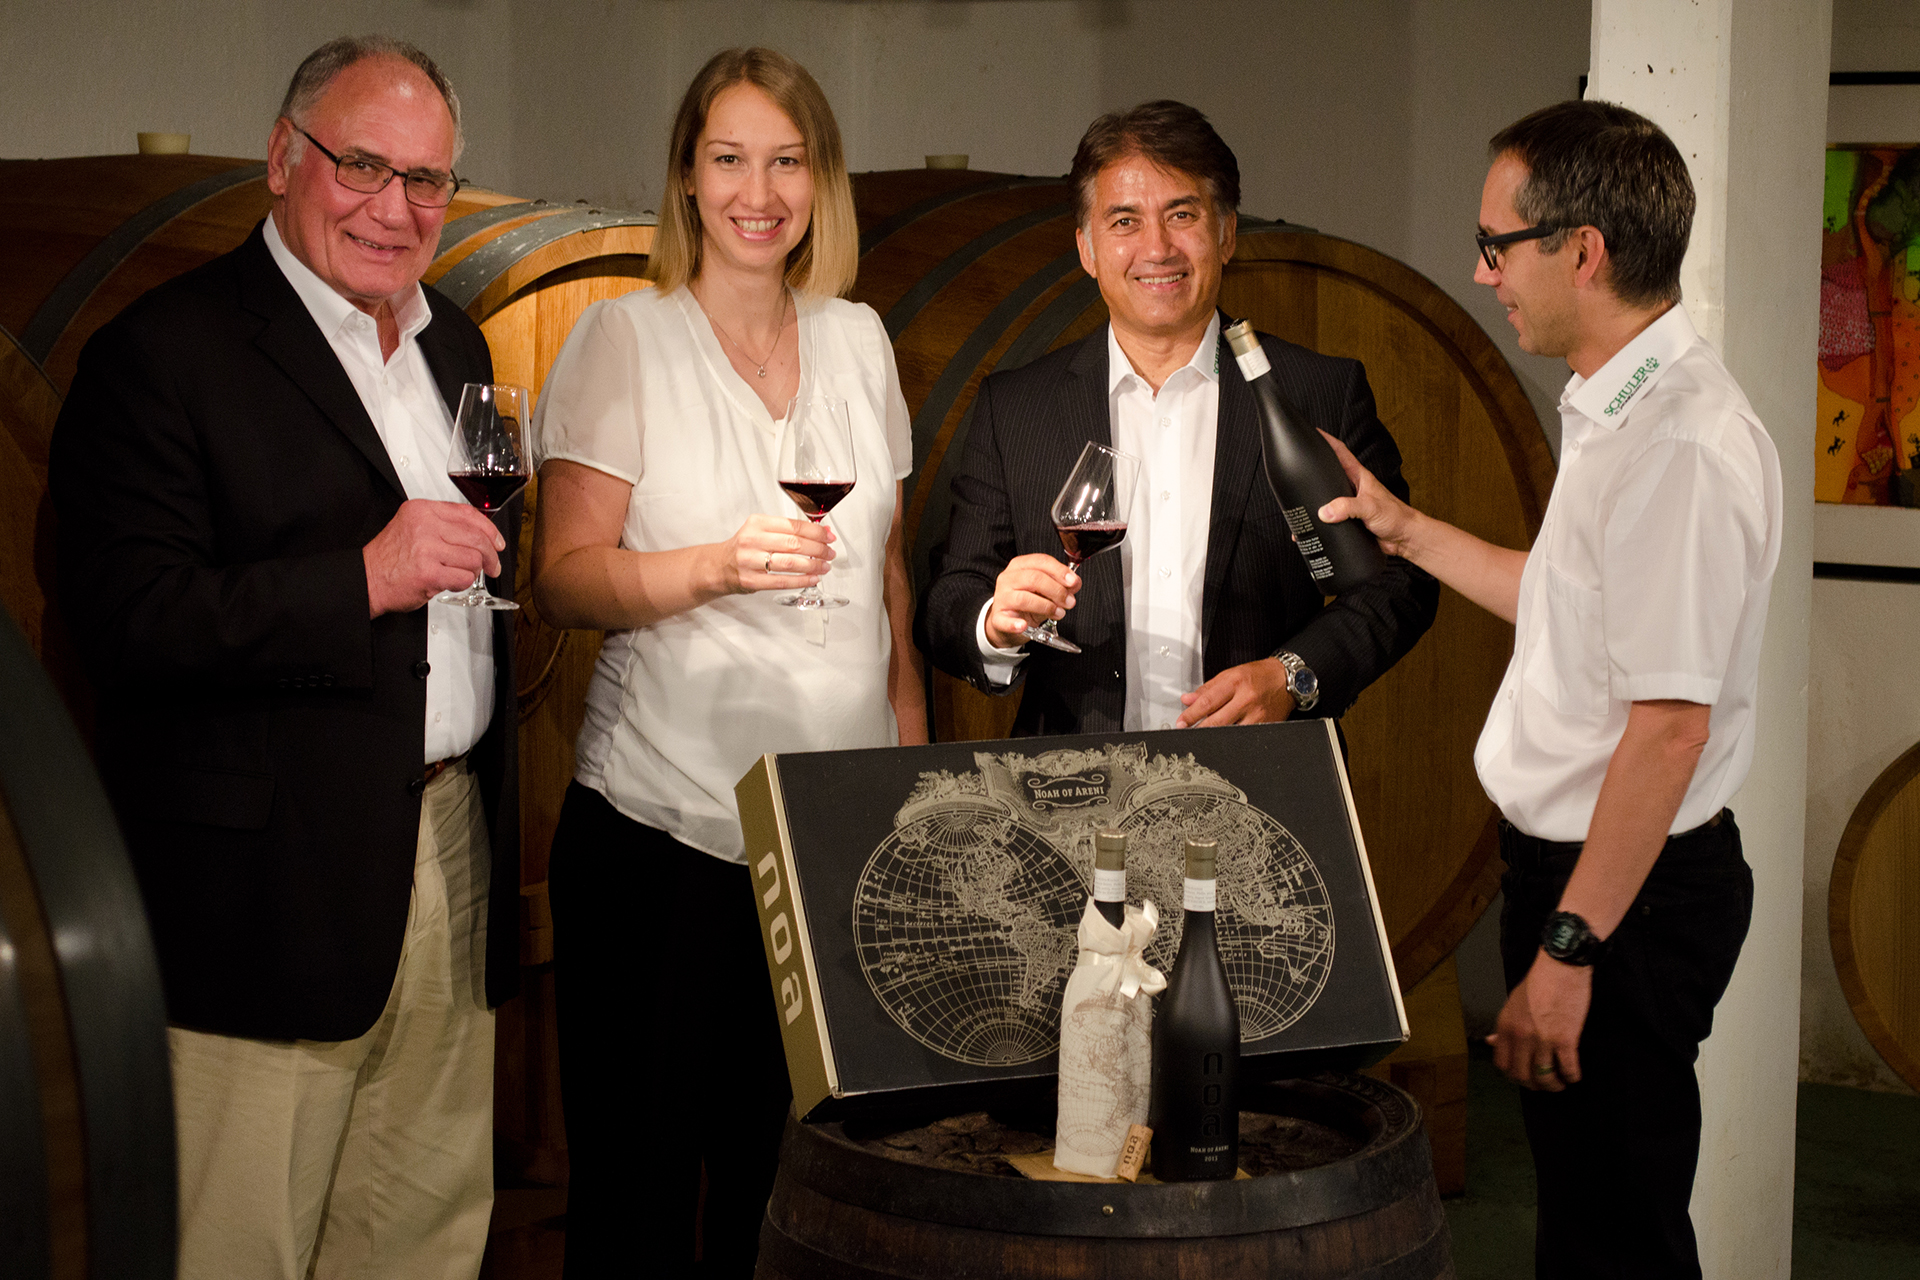 8 facts about Noah of Areni, the Decanter World Wine gold medal winner 